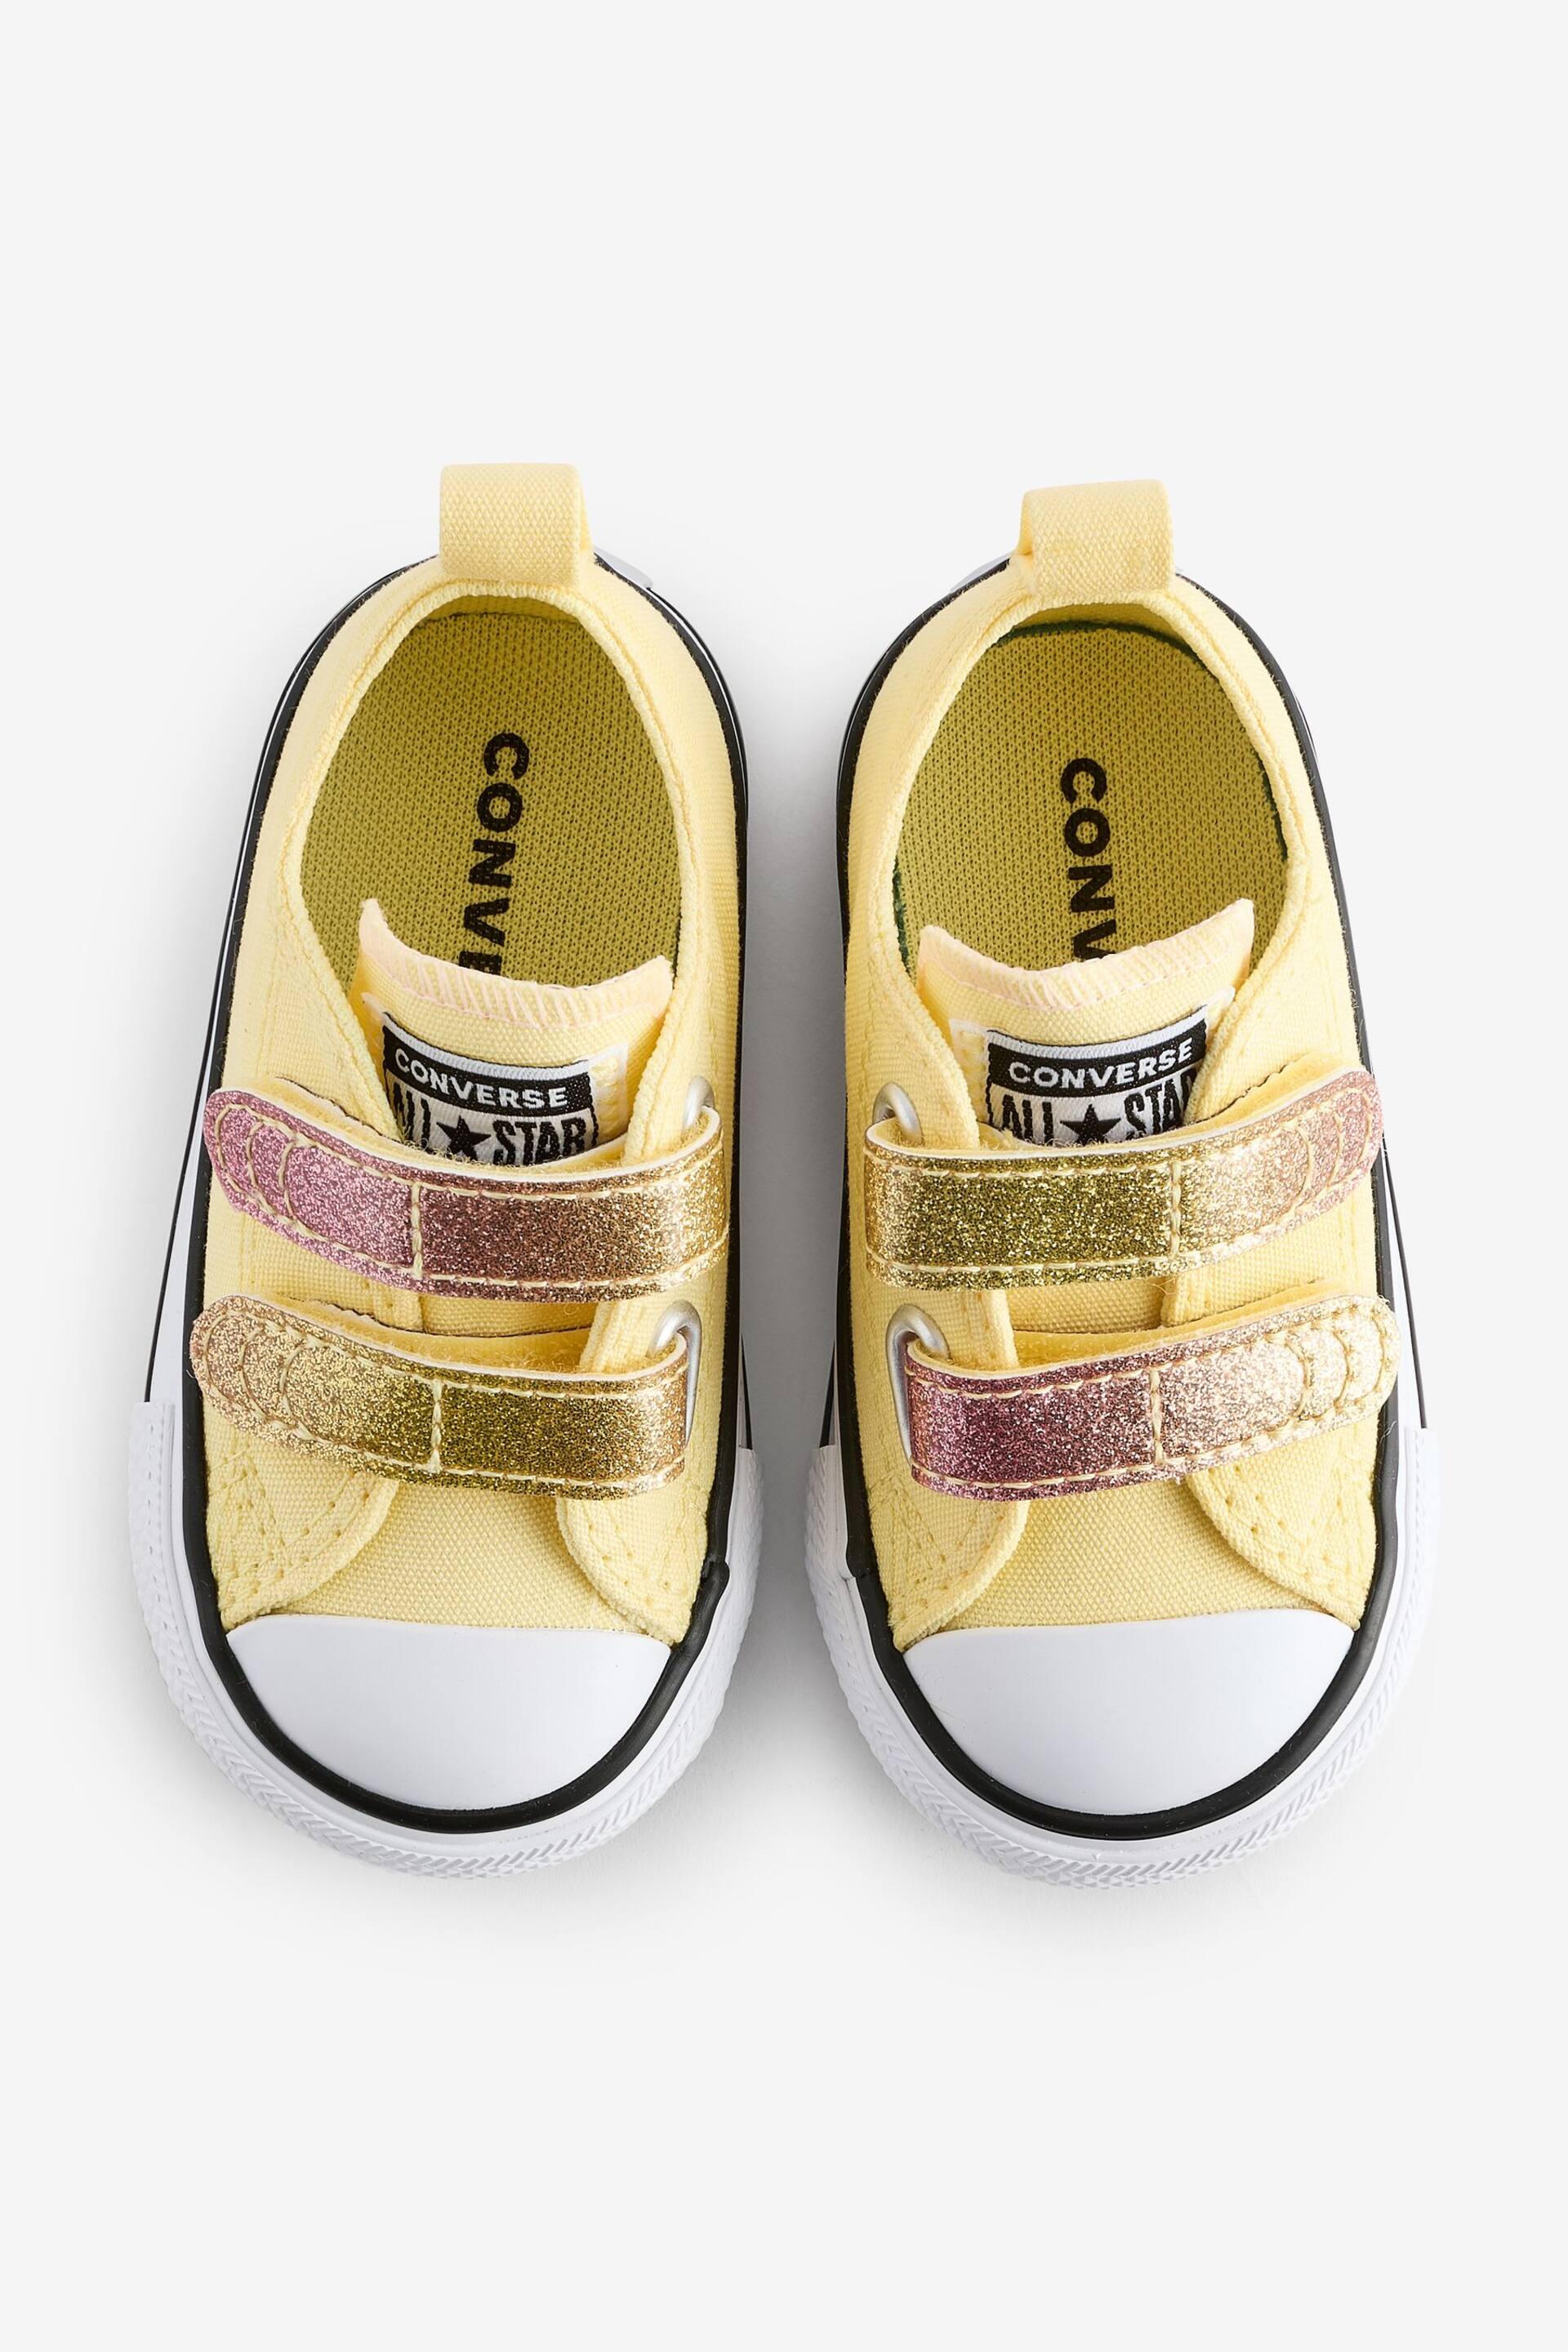 Converse Yellow Lemon Infant 2V Trainers - Image 5 of 9